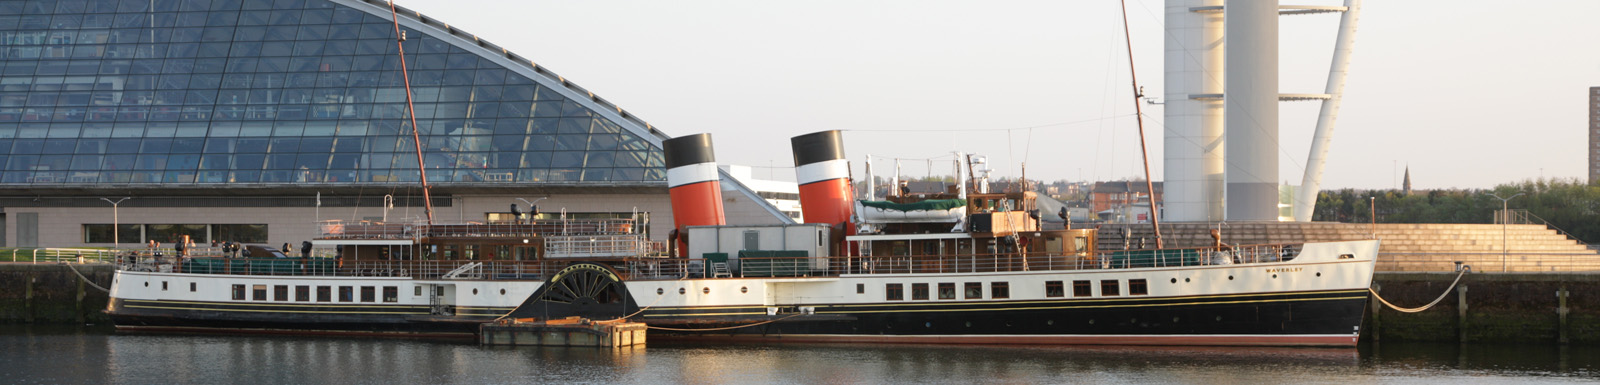 The Waverley paddle steamer at Prince's Dock